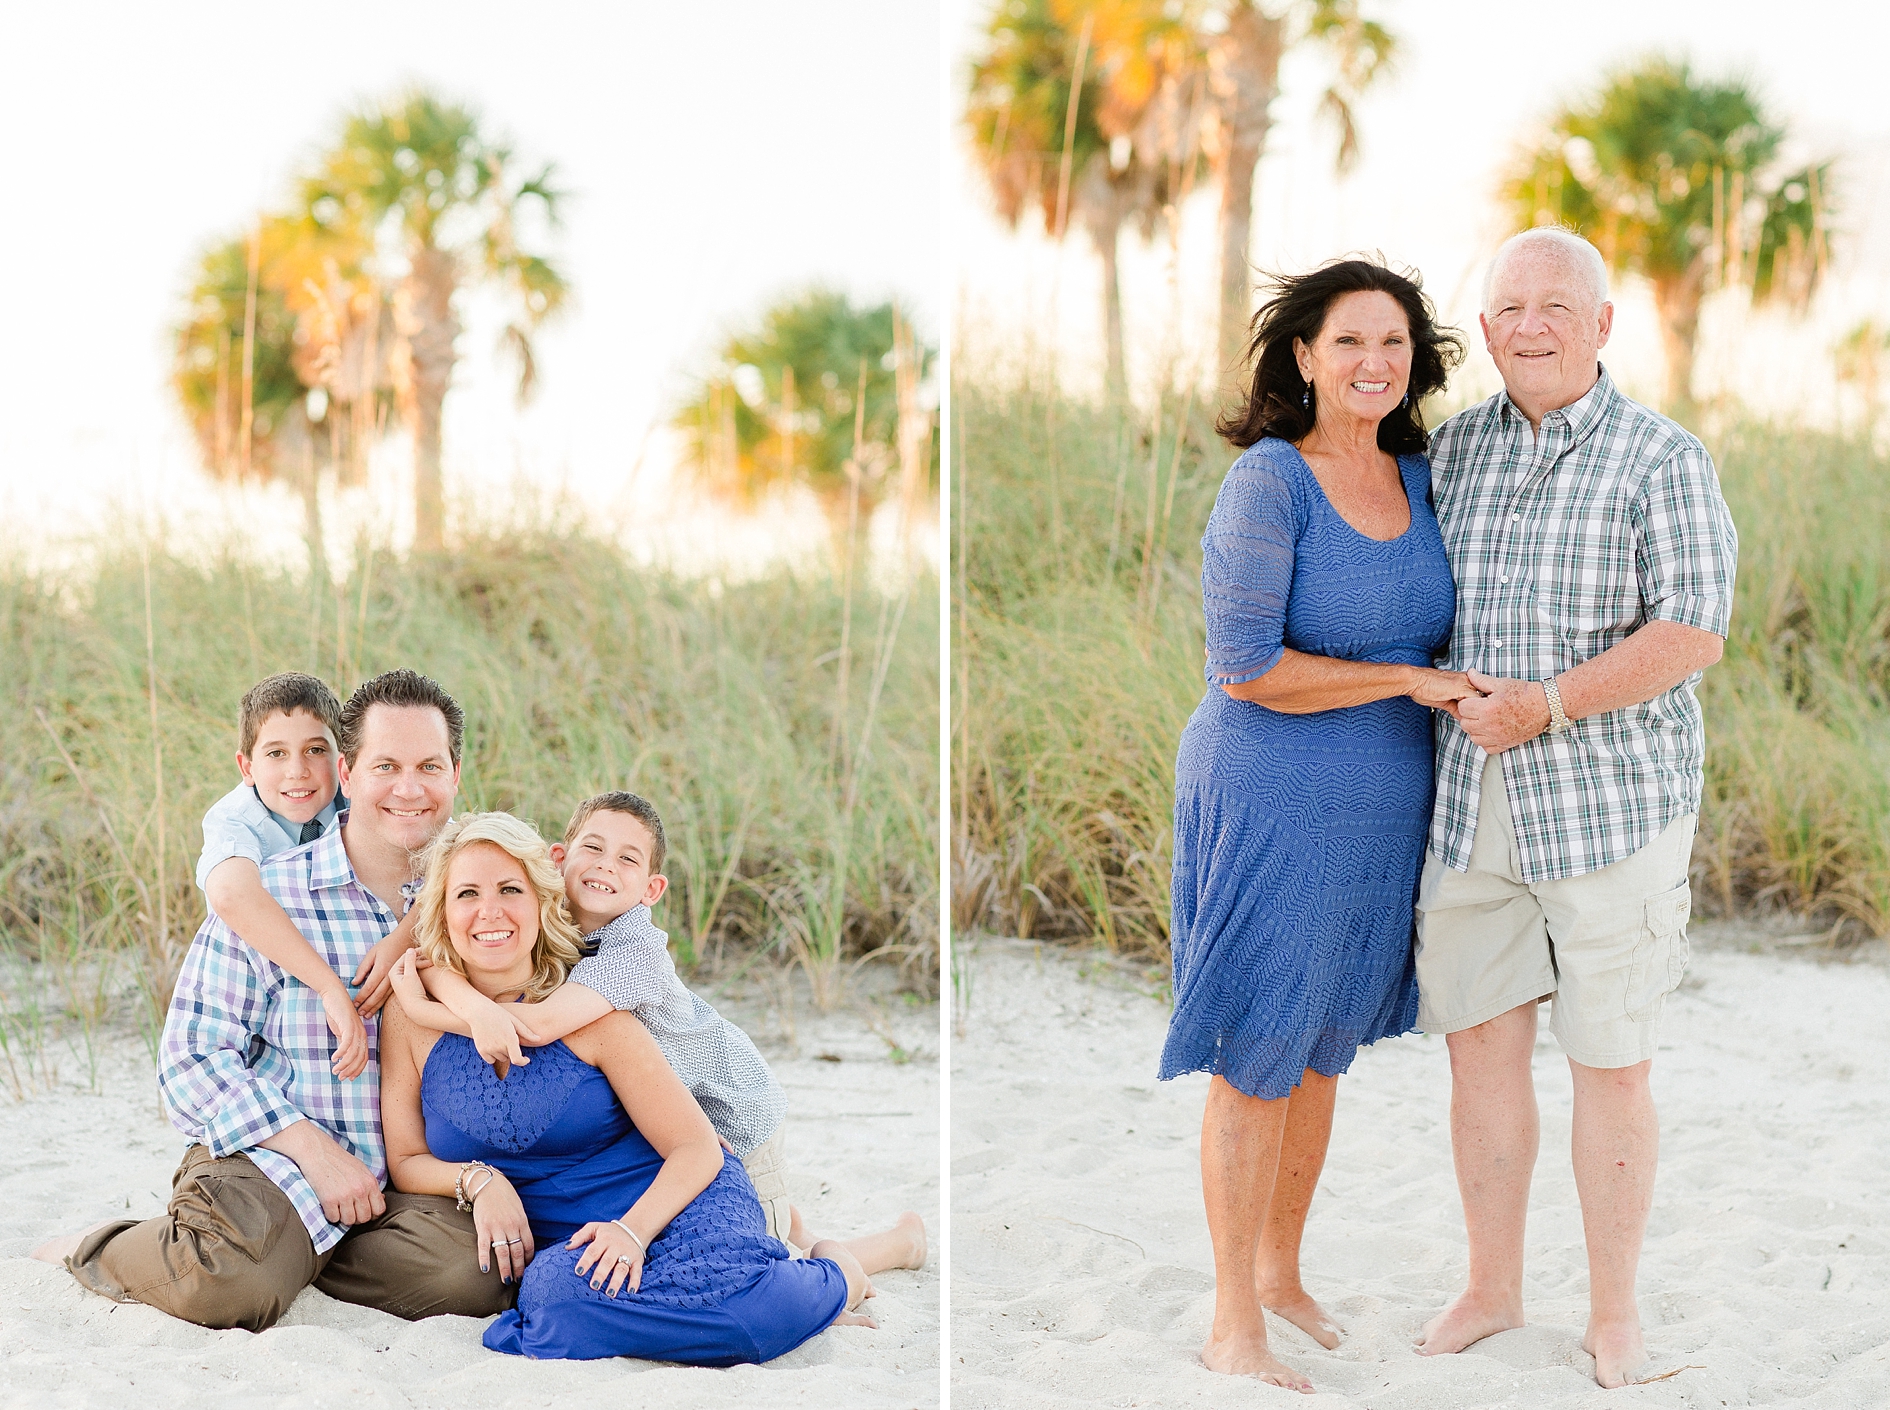 Tarpon Springs Family Session | © Ailyn La Torre Photography 2015